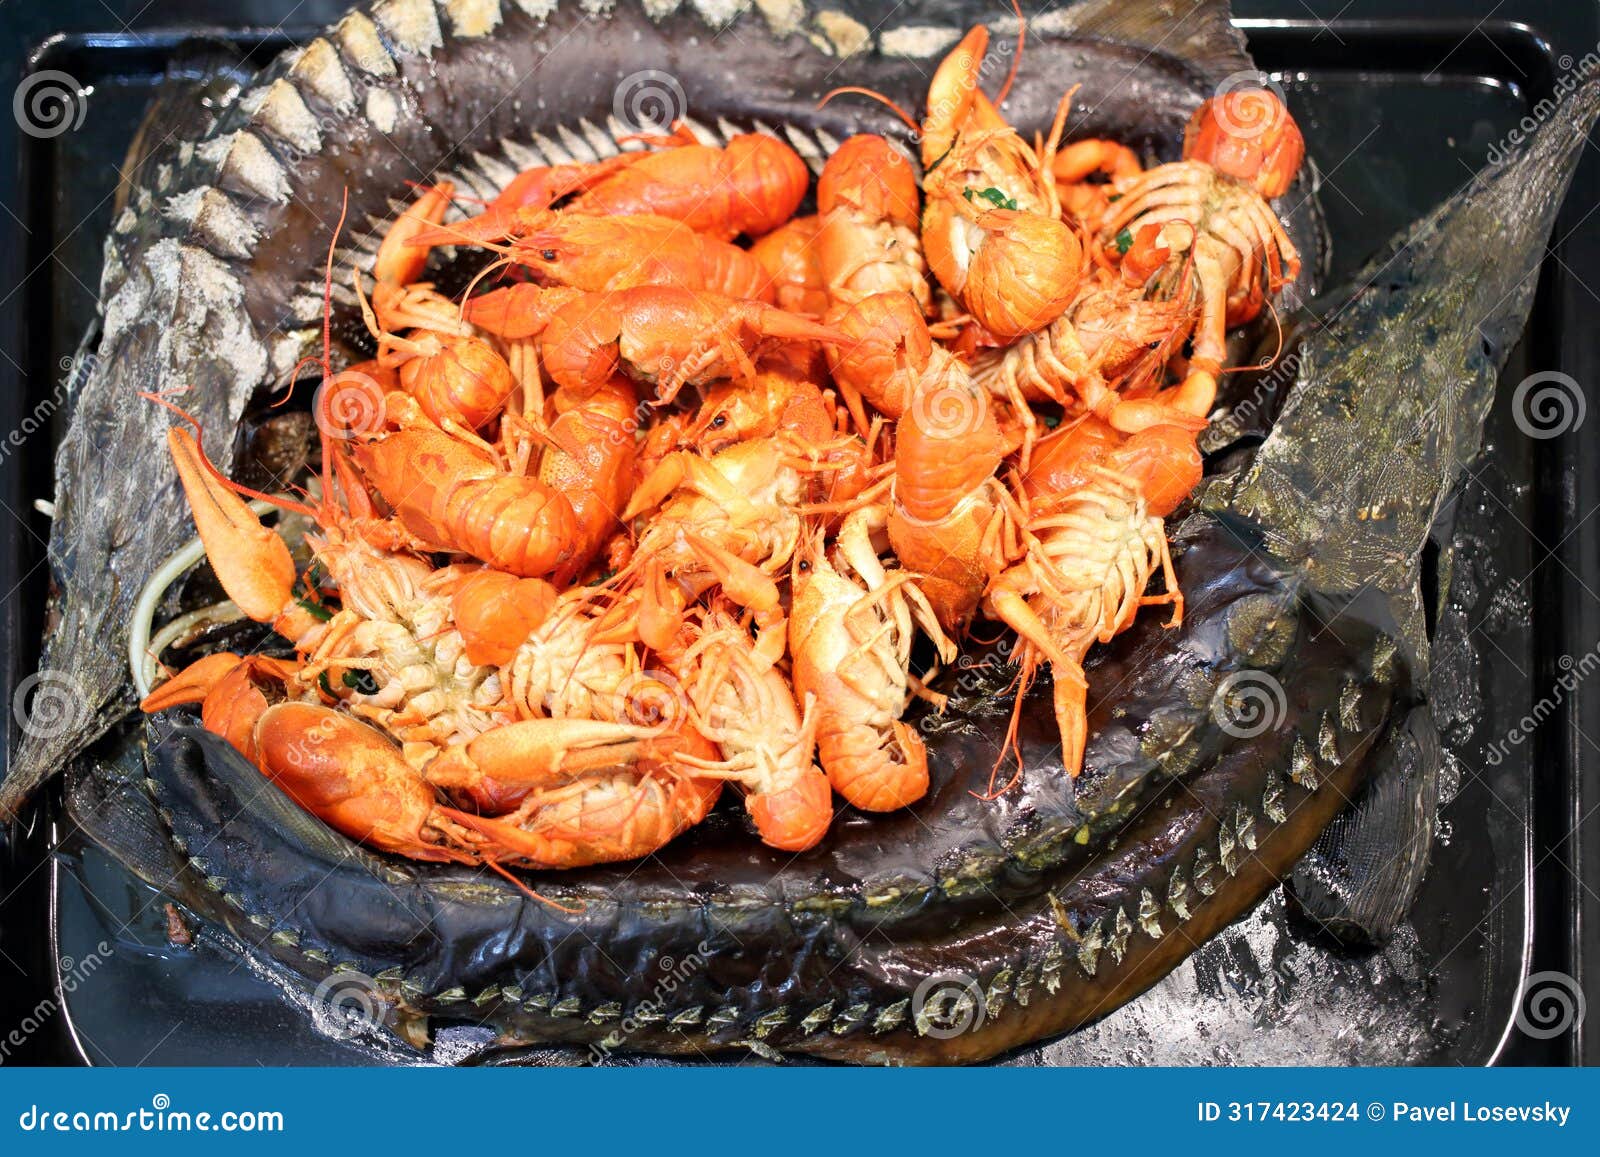 baked sturgeons and crayfish on a black pan,